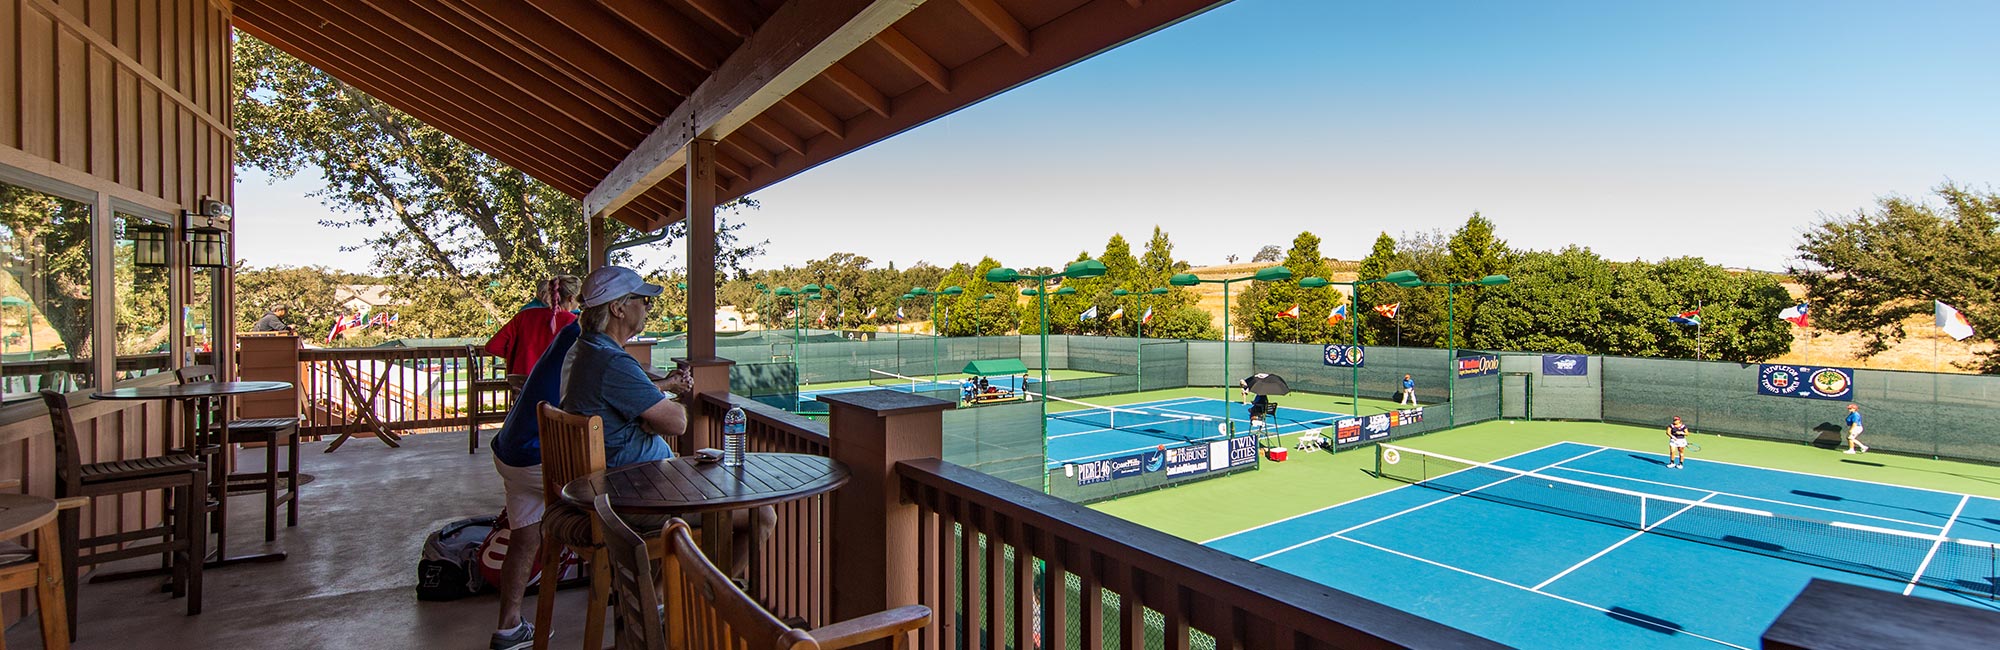 Junior Tennis Clinics and Lessons